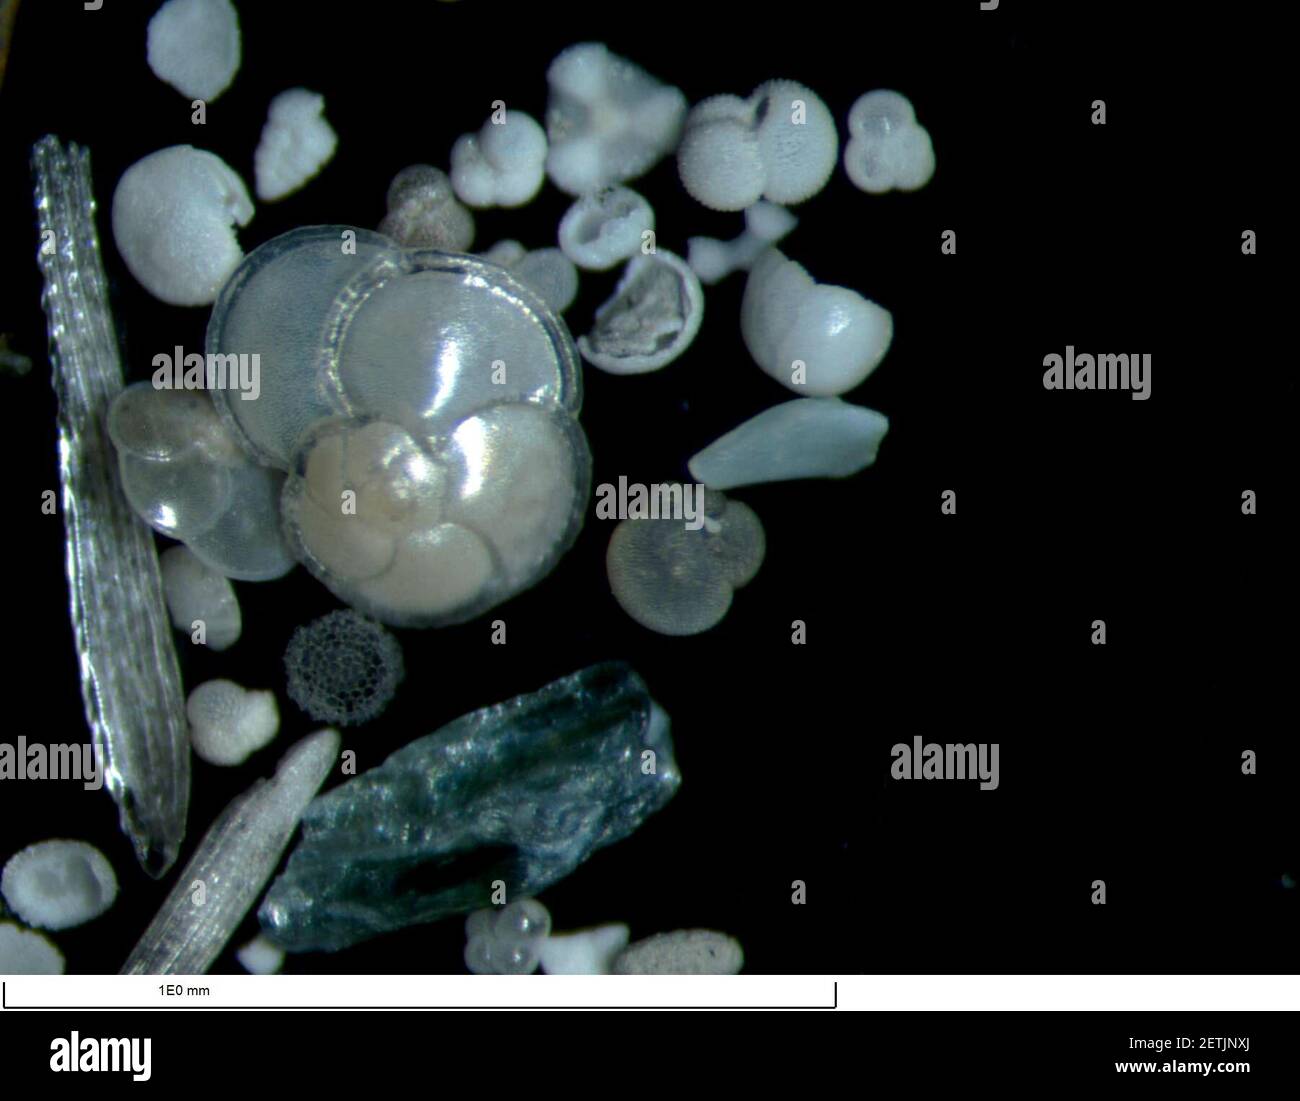 (170315) -- ABOARD JOIDES RESOLUTION, March 15, 2017 (Xinhua) -- Foraminifera samples drilled from the seafloor of the South China Sea are seen under the microscope on the U.S. drilling ship JOIDES Resolution, March 14, 2017. Dozens of scientists from different countries are on an expedition to the South China Sea, to explore the formation of the sea as part of the International Ocean Discovery Program (IODP). (Xinhua/Zhang Jiansong) (zyd) (Photo by Xinhua/Sipa USA) Stock Photo